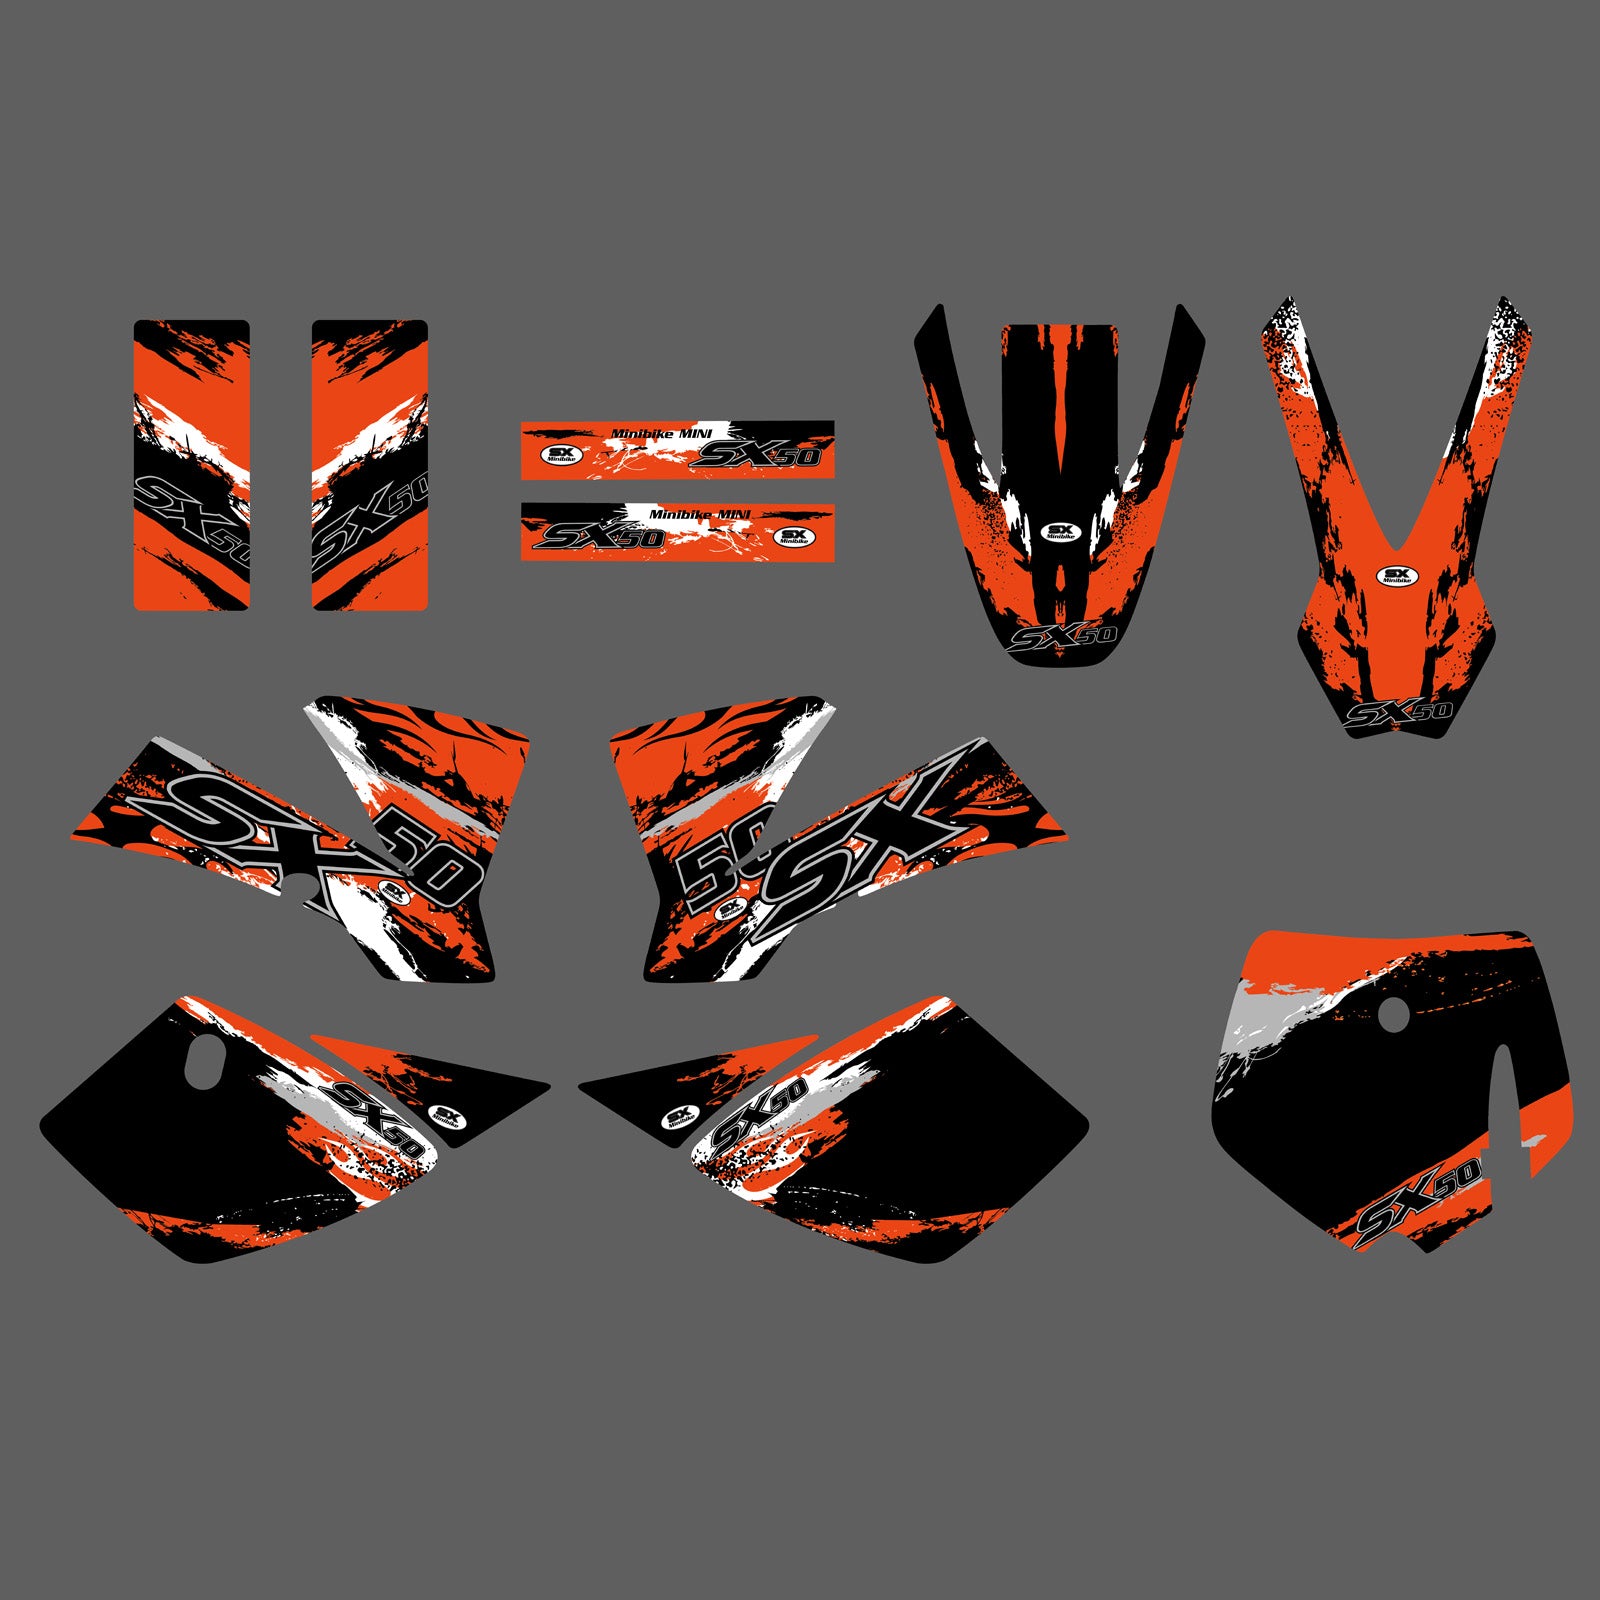 Team Graphics Backgrounds Graphic Decals Stickers For KTM 50 SX 2002-2008